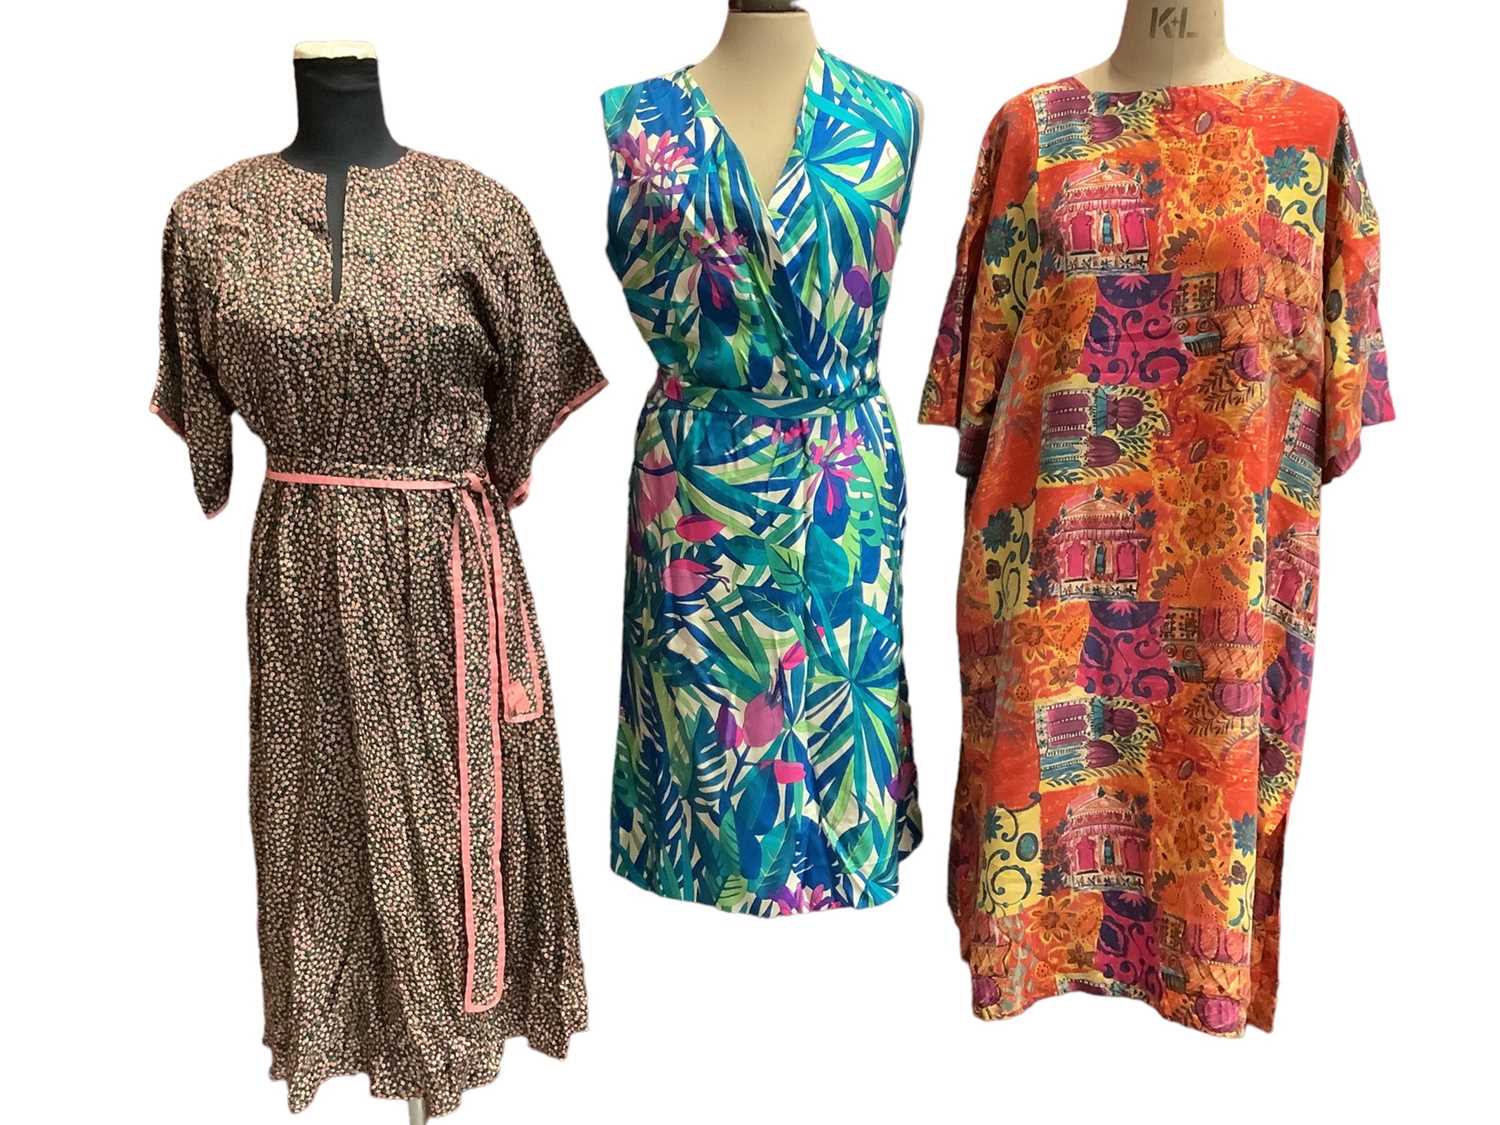 Lot 2053 - Selection of ladies 1970s/80s colourful silk and other clothing, makes include Sarah Spencer and Jaeger. Plus a navy blue satin strapless column evening dress.